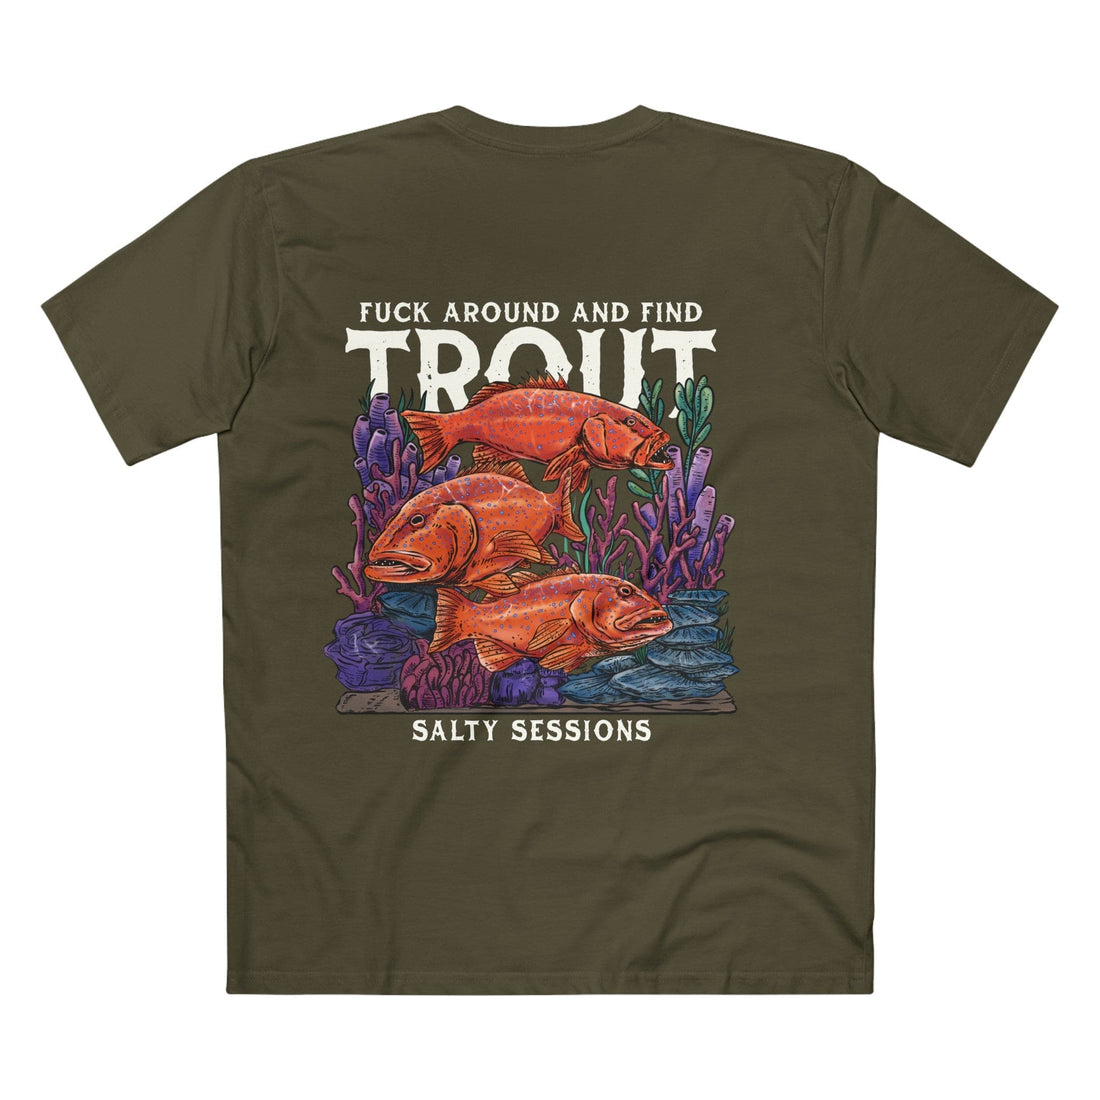 F**k around and find trout tee